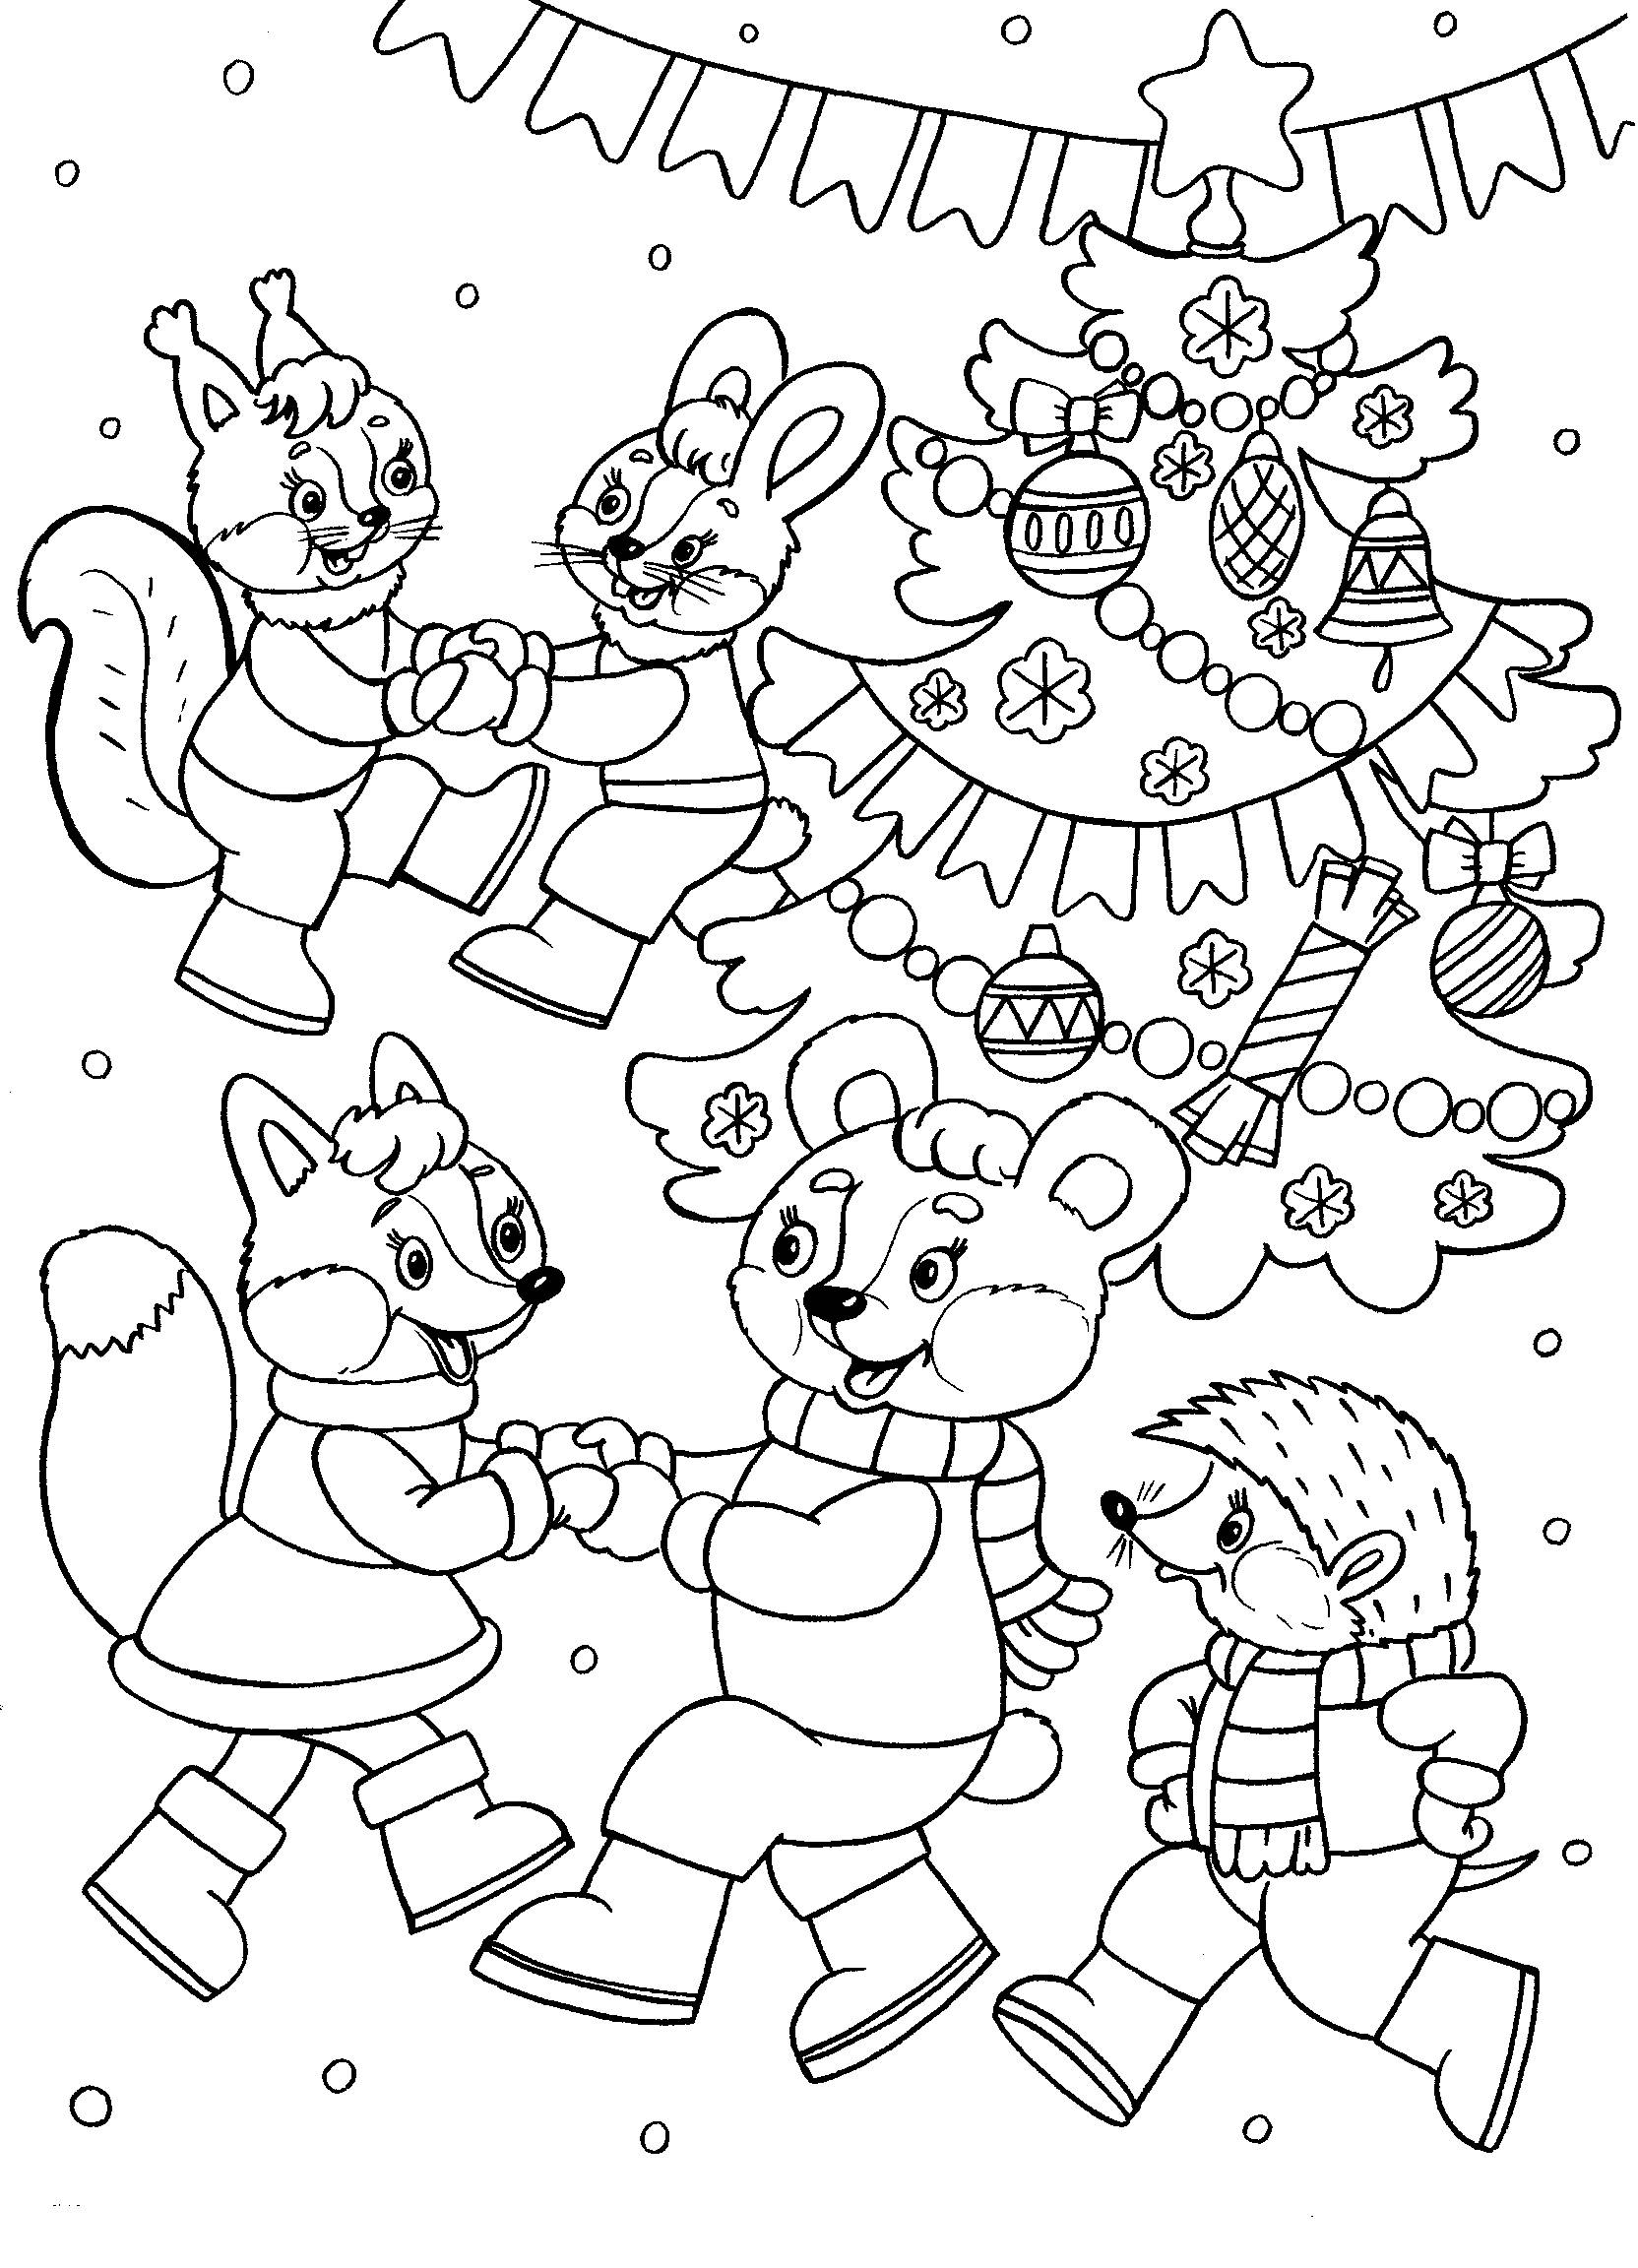 Coloring page new year round dance